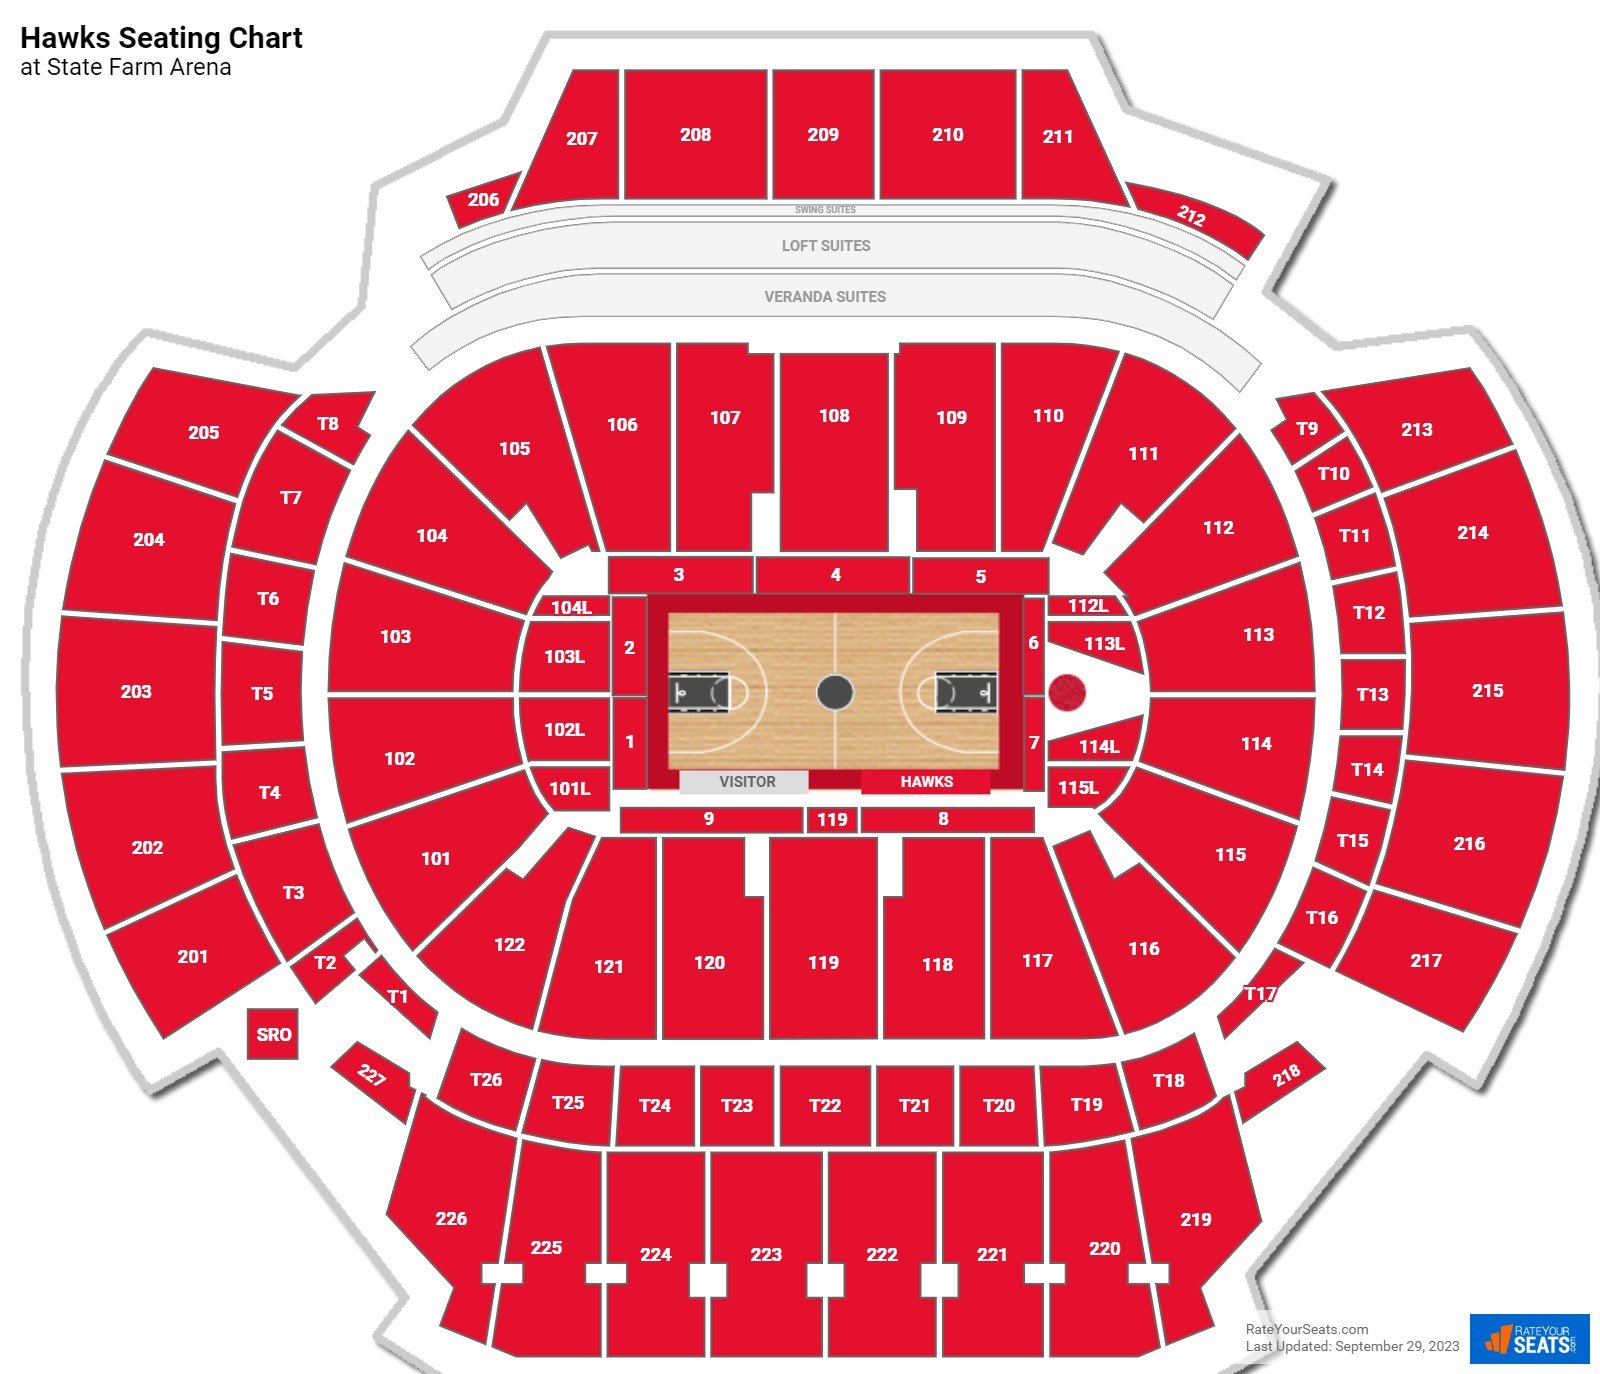 State Farm Arena Seating Charts RateYourSeats Com